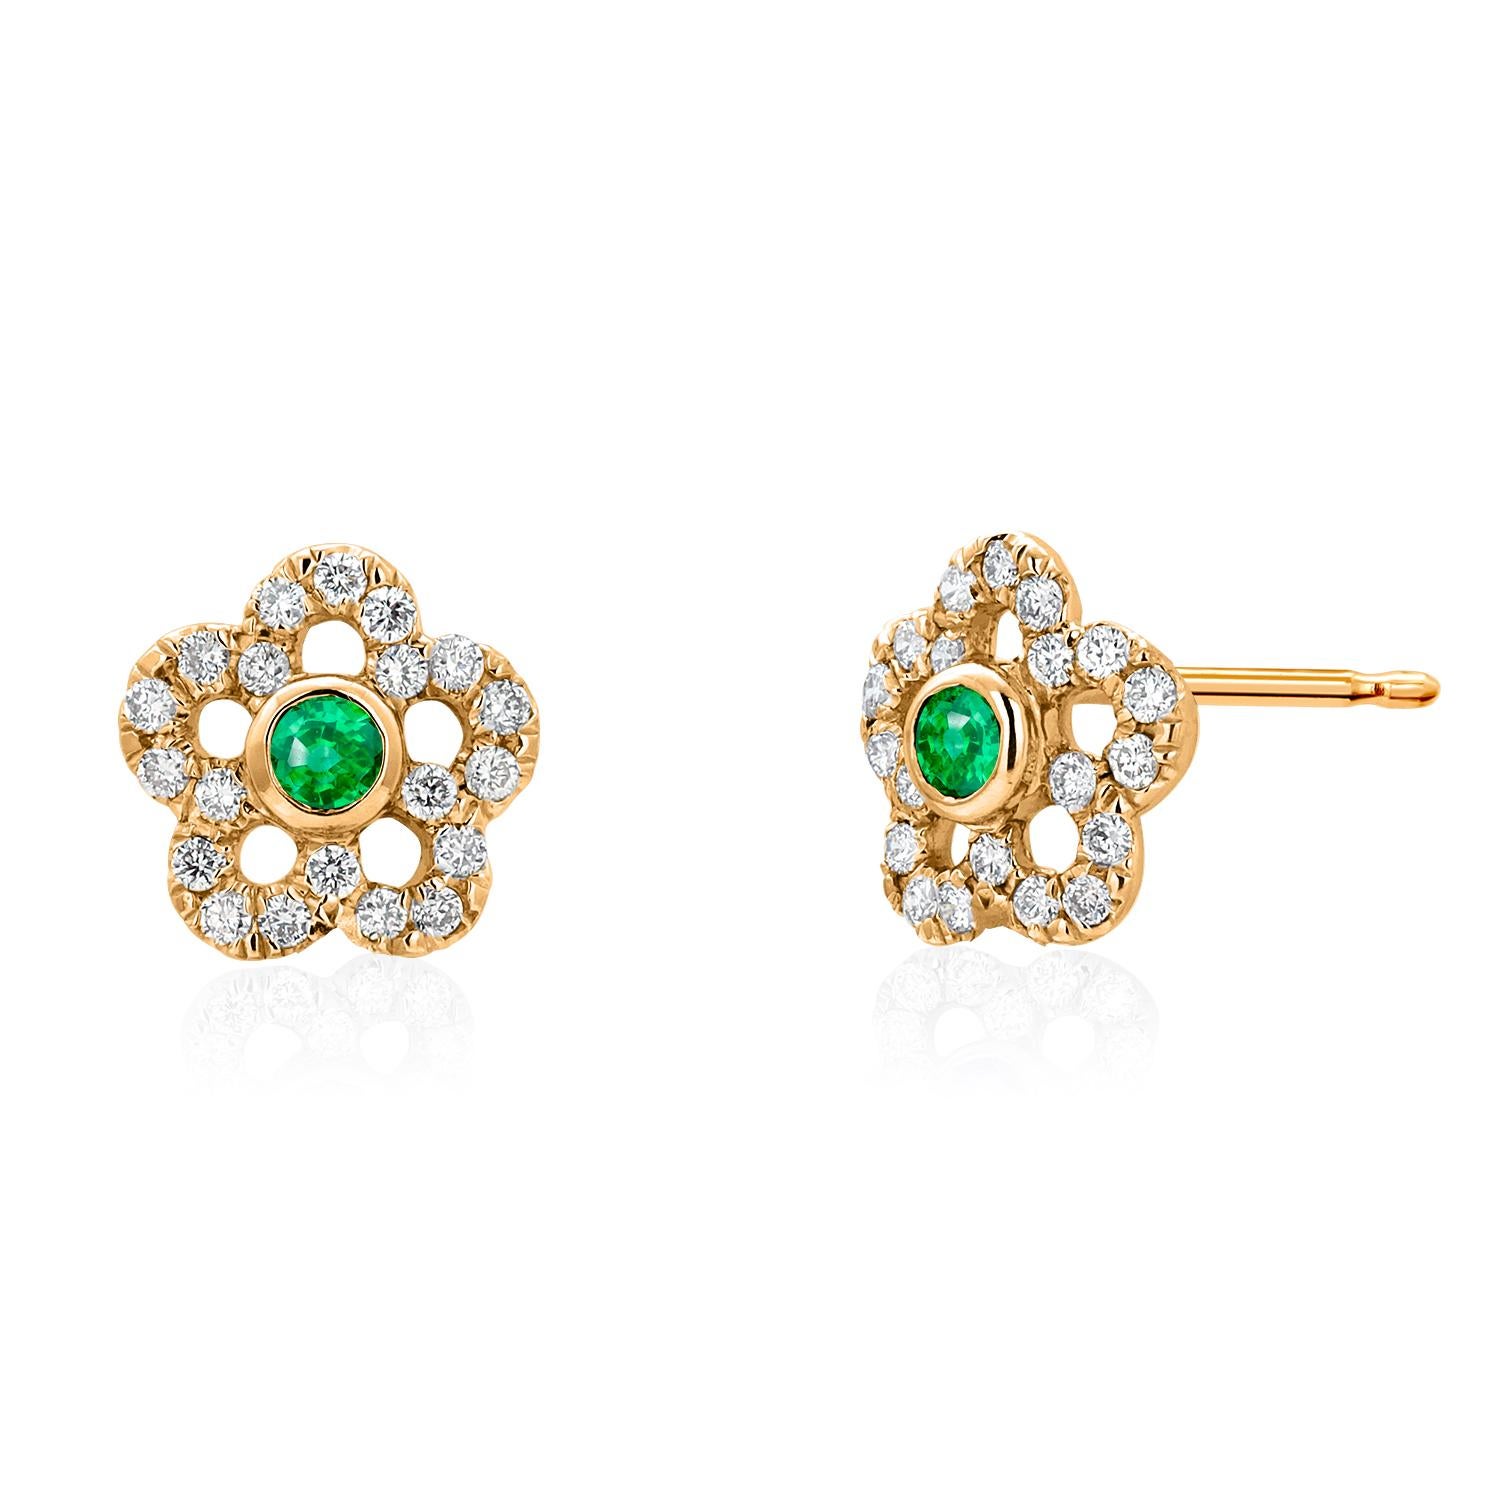 Emerald Pave Diamonds 1.50 Carat Floral 14 Karat Yellow Gold Earrings In New Condition For Sale In New York, NY